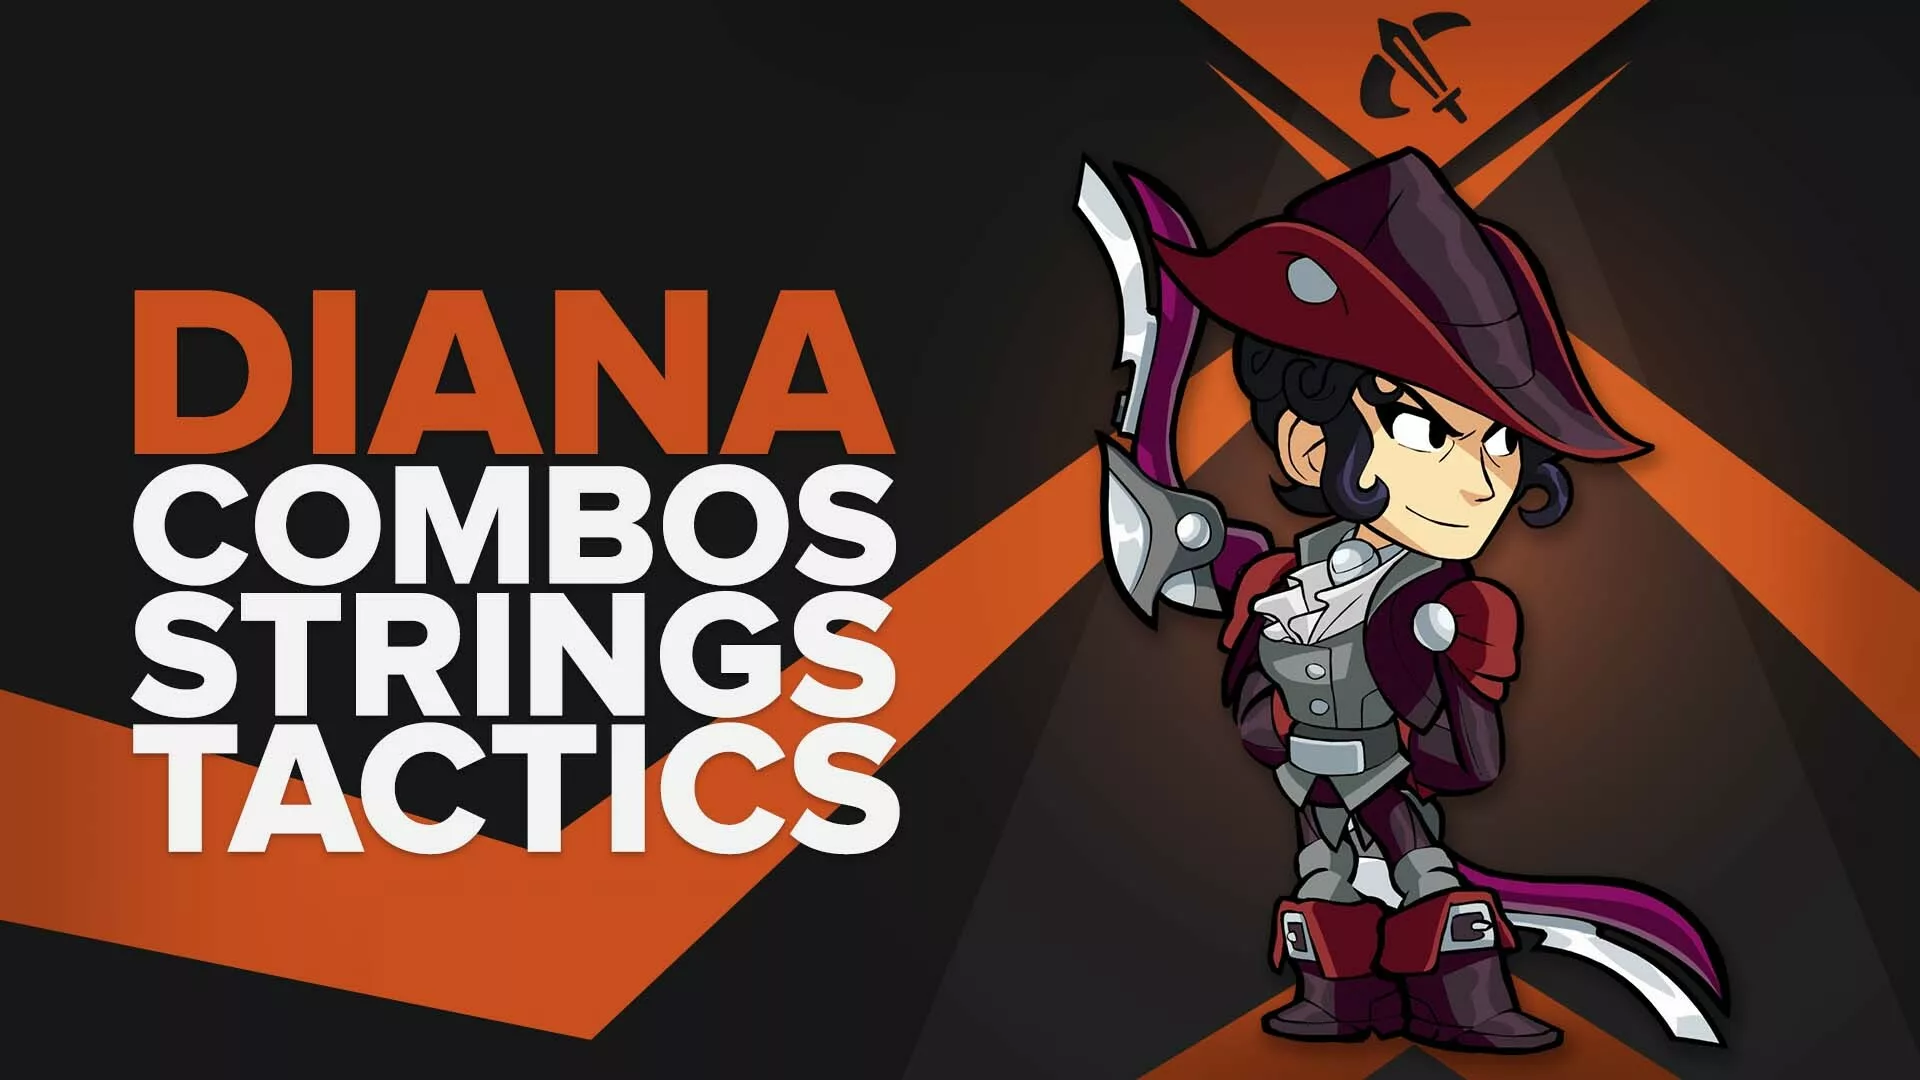 Best Diana combos, strings, and combat tactics in Brawlhalla